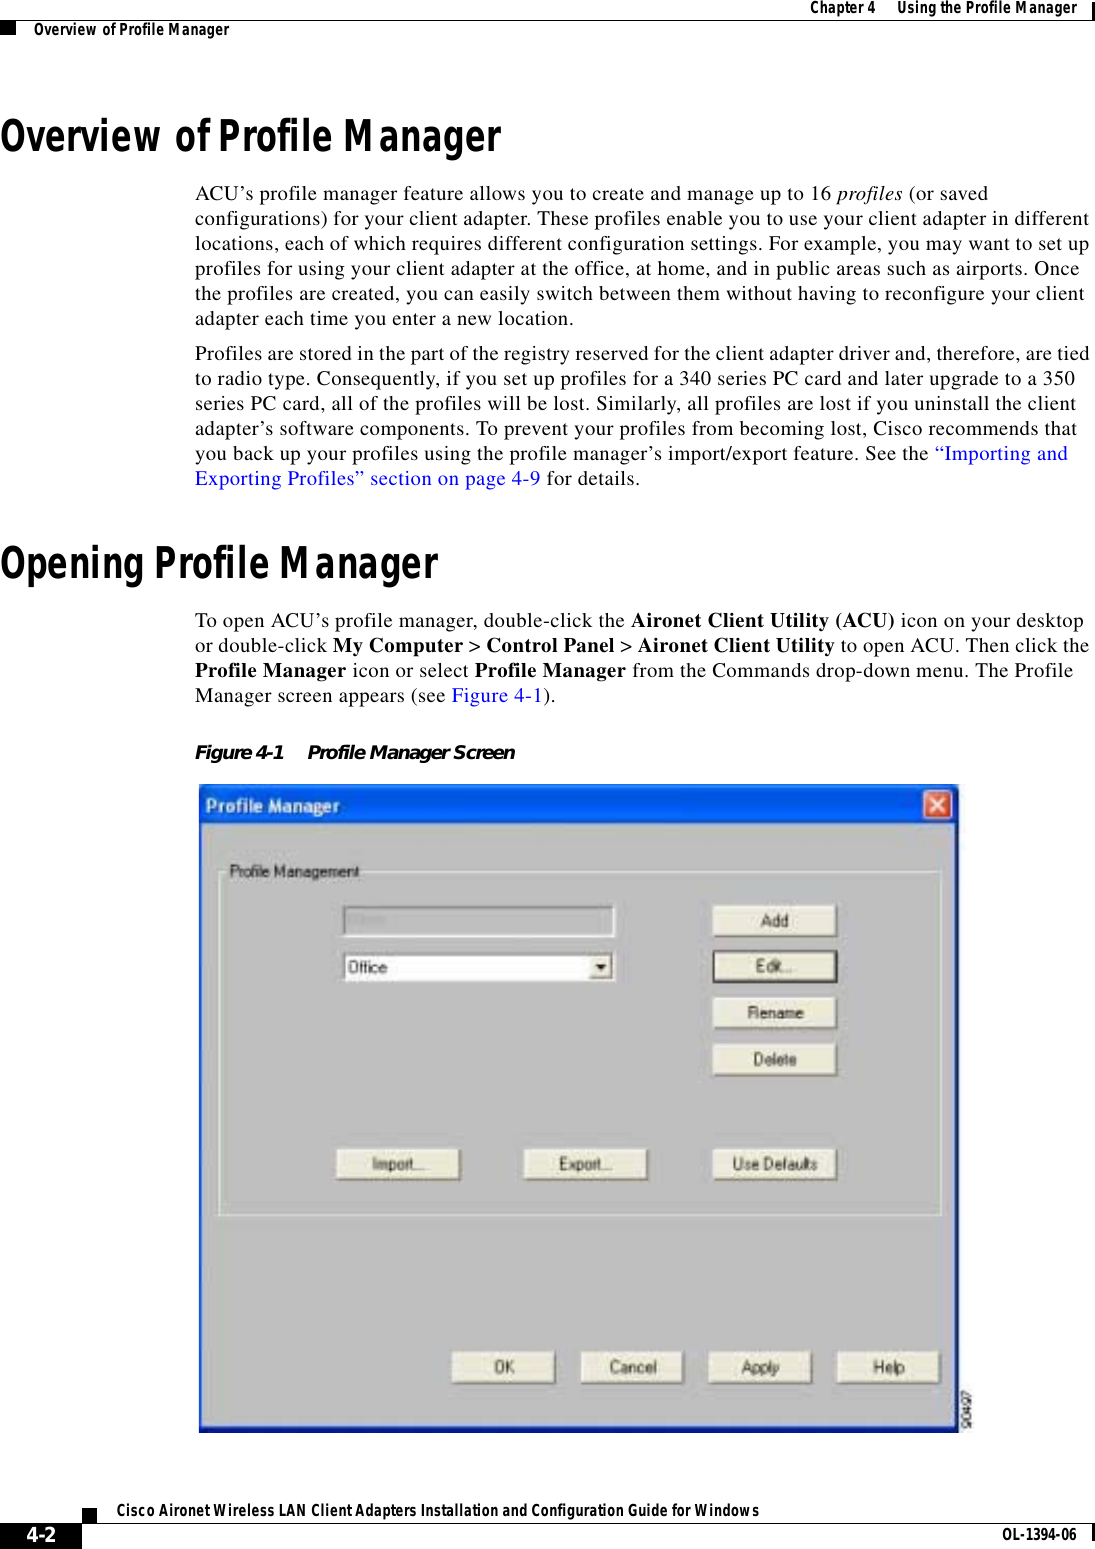 4-2Cisco Aironet Wireless LAN Client Adapters Installation and Configuration Guide for Windows OL-1394-06Chapter 4      Using the Profile ManagerOverview of Profile ManagerOverview of Profile ManagerACU’s profile manager feature allows you to create and manage up to 16 profiles (or saved configurations) for your client adapter. These profiles enable you to use your client adapter in different locations, each of which requires different configuration settings. For example, you may want to set up profiles for using your client adapter at the office, at home, and in public areas such as airports. Once the profiles are created, you can easily switch between them without having to reconfigure your client adapter each time you enter a new location.Profiles are stored in the part of the registry reserved for the client adapter driver and, therefore, are tied to radio type. Consequently, if you set up profiles for a 340 series PC card and later upgrade to a 350 series PC card, all of the profiles will be lost. Similarly, all profiles are lost if you uninstall the client adapter’s software components. To prevent your profiles from becoming lost, Cisco recommends that you back up your profiles using the profile manager’s import/export feature. See the “Importing and Exporting Profiles” section on page 4-9 for details.Opening Profile ManagerTo open ACU’s profile manager, double-click the Aironet Client Utility (ACU) icon on your desktop or double-click My Computer &gt; Control Panel &gt; Aironet Client Utility to open ACU. Then click the Profile Manager icon or select Profile Manager from the Commands drop-down menu. The Profile Manager screen appears (see Figure 4-1).Figure 4-1 Profile Manager Screen